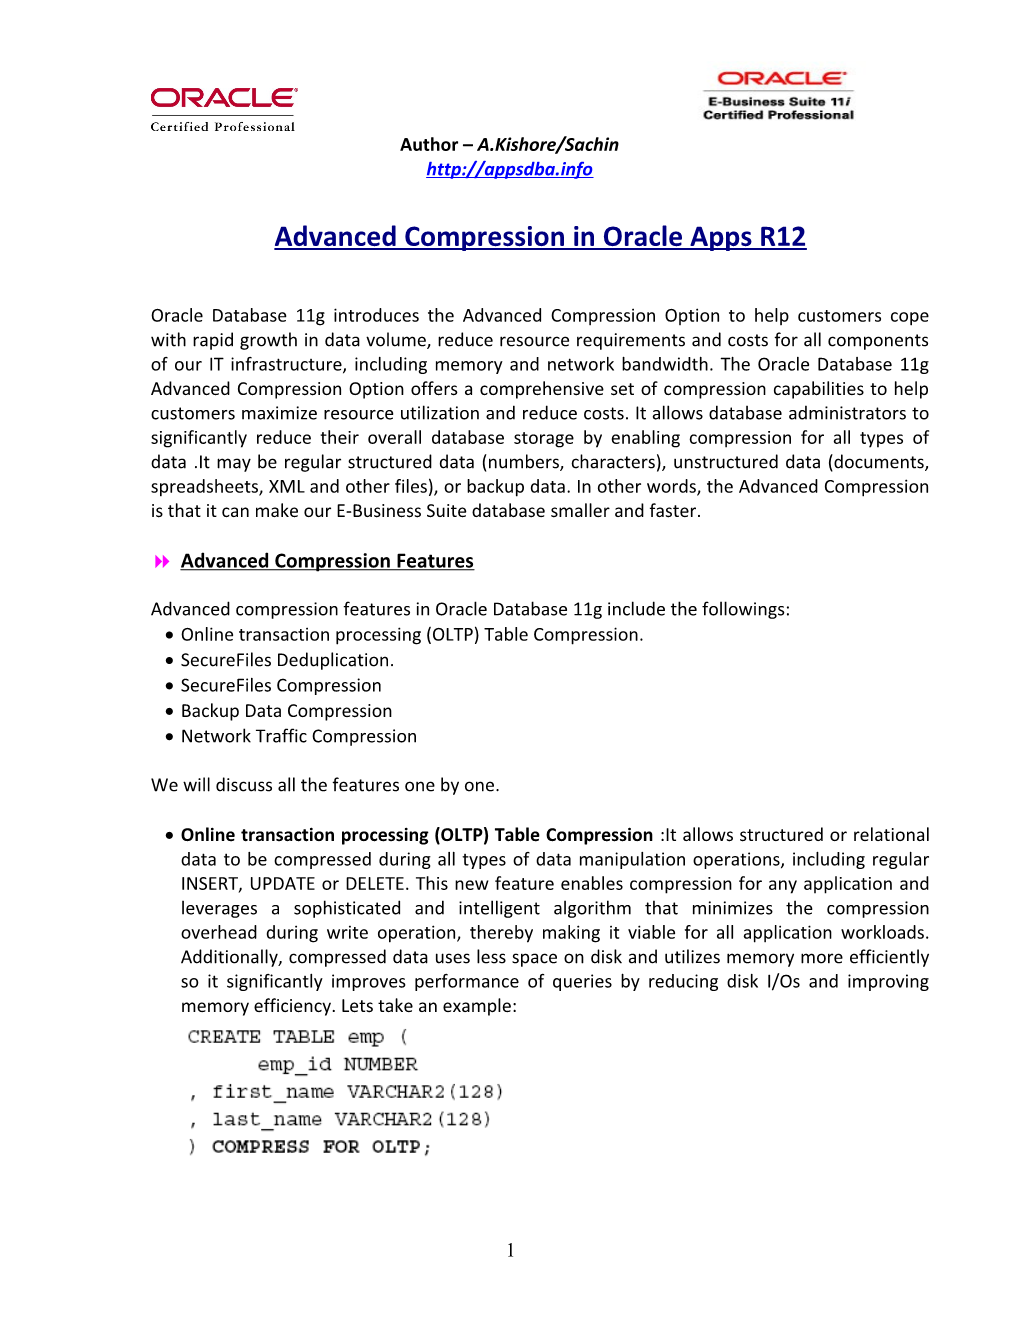 Advanced Compression in Oracle Apps R12